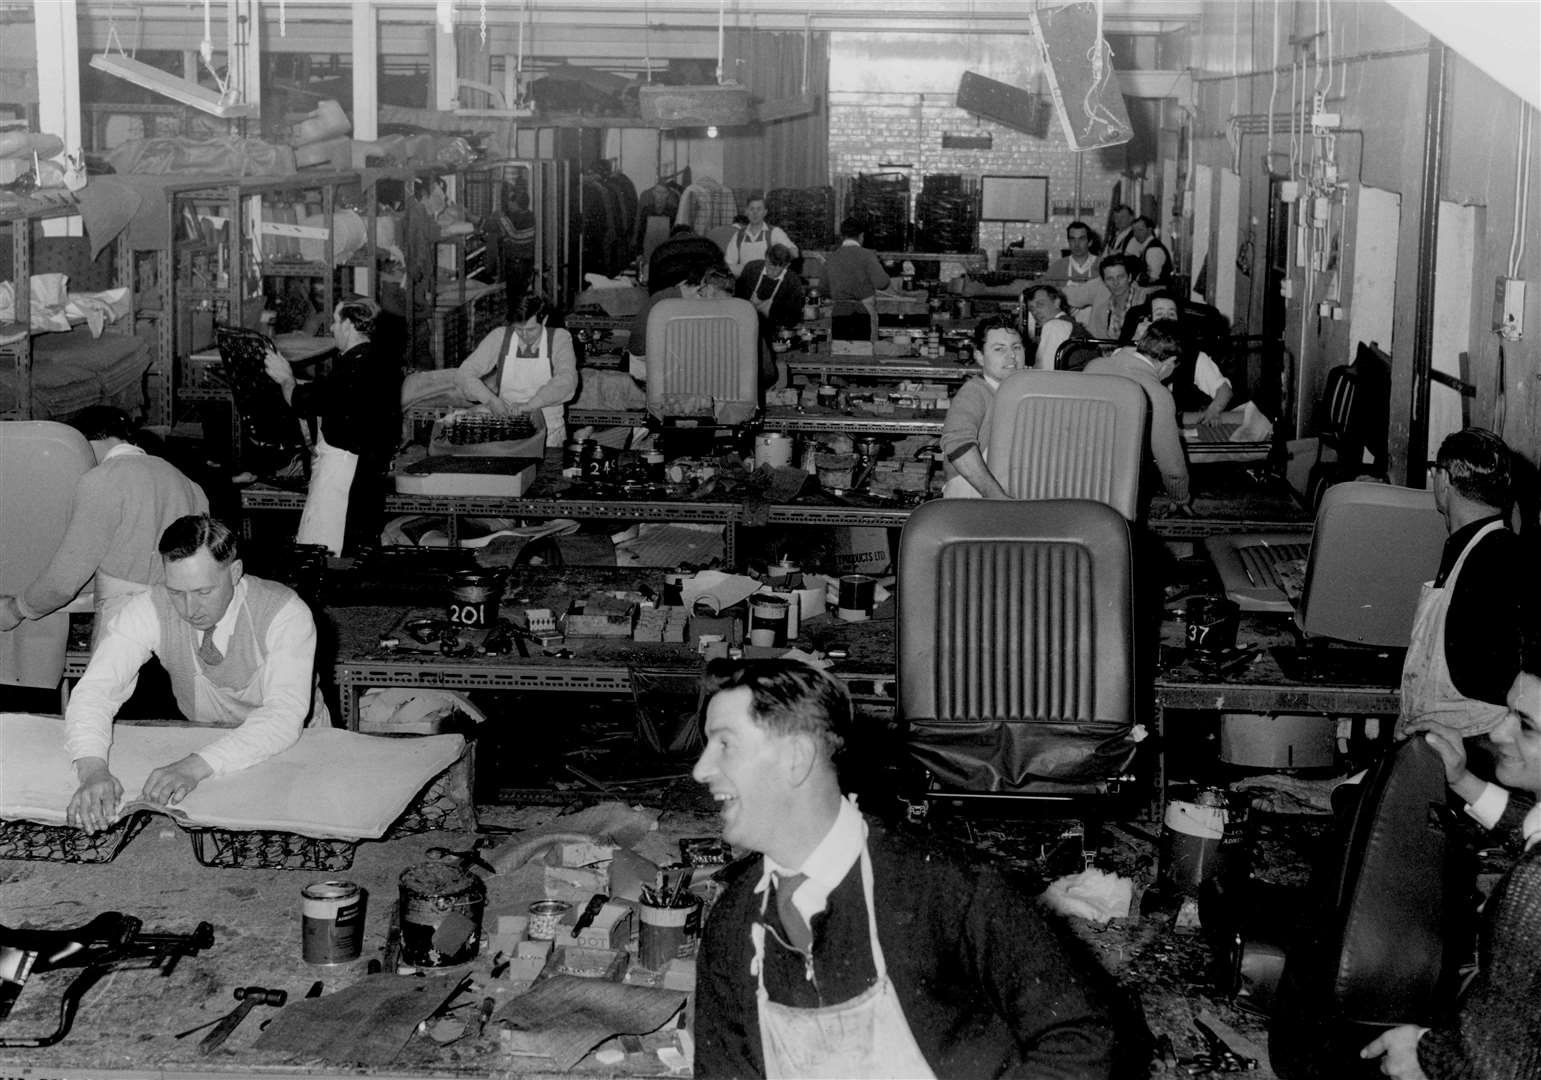 Over the years Rootes Ltd expanded a small section of its Canterbury workshops into a thriving little industry employing over 150 staff at Rhodaus Town, pictured in February 1965, in premises that were originally part of Canterbury Motor Company